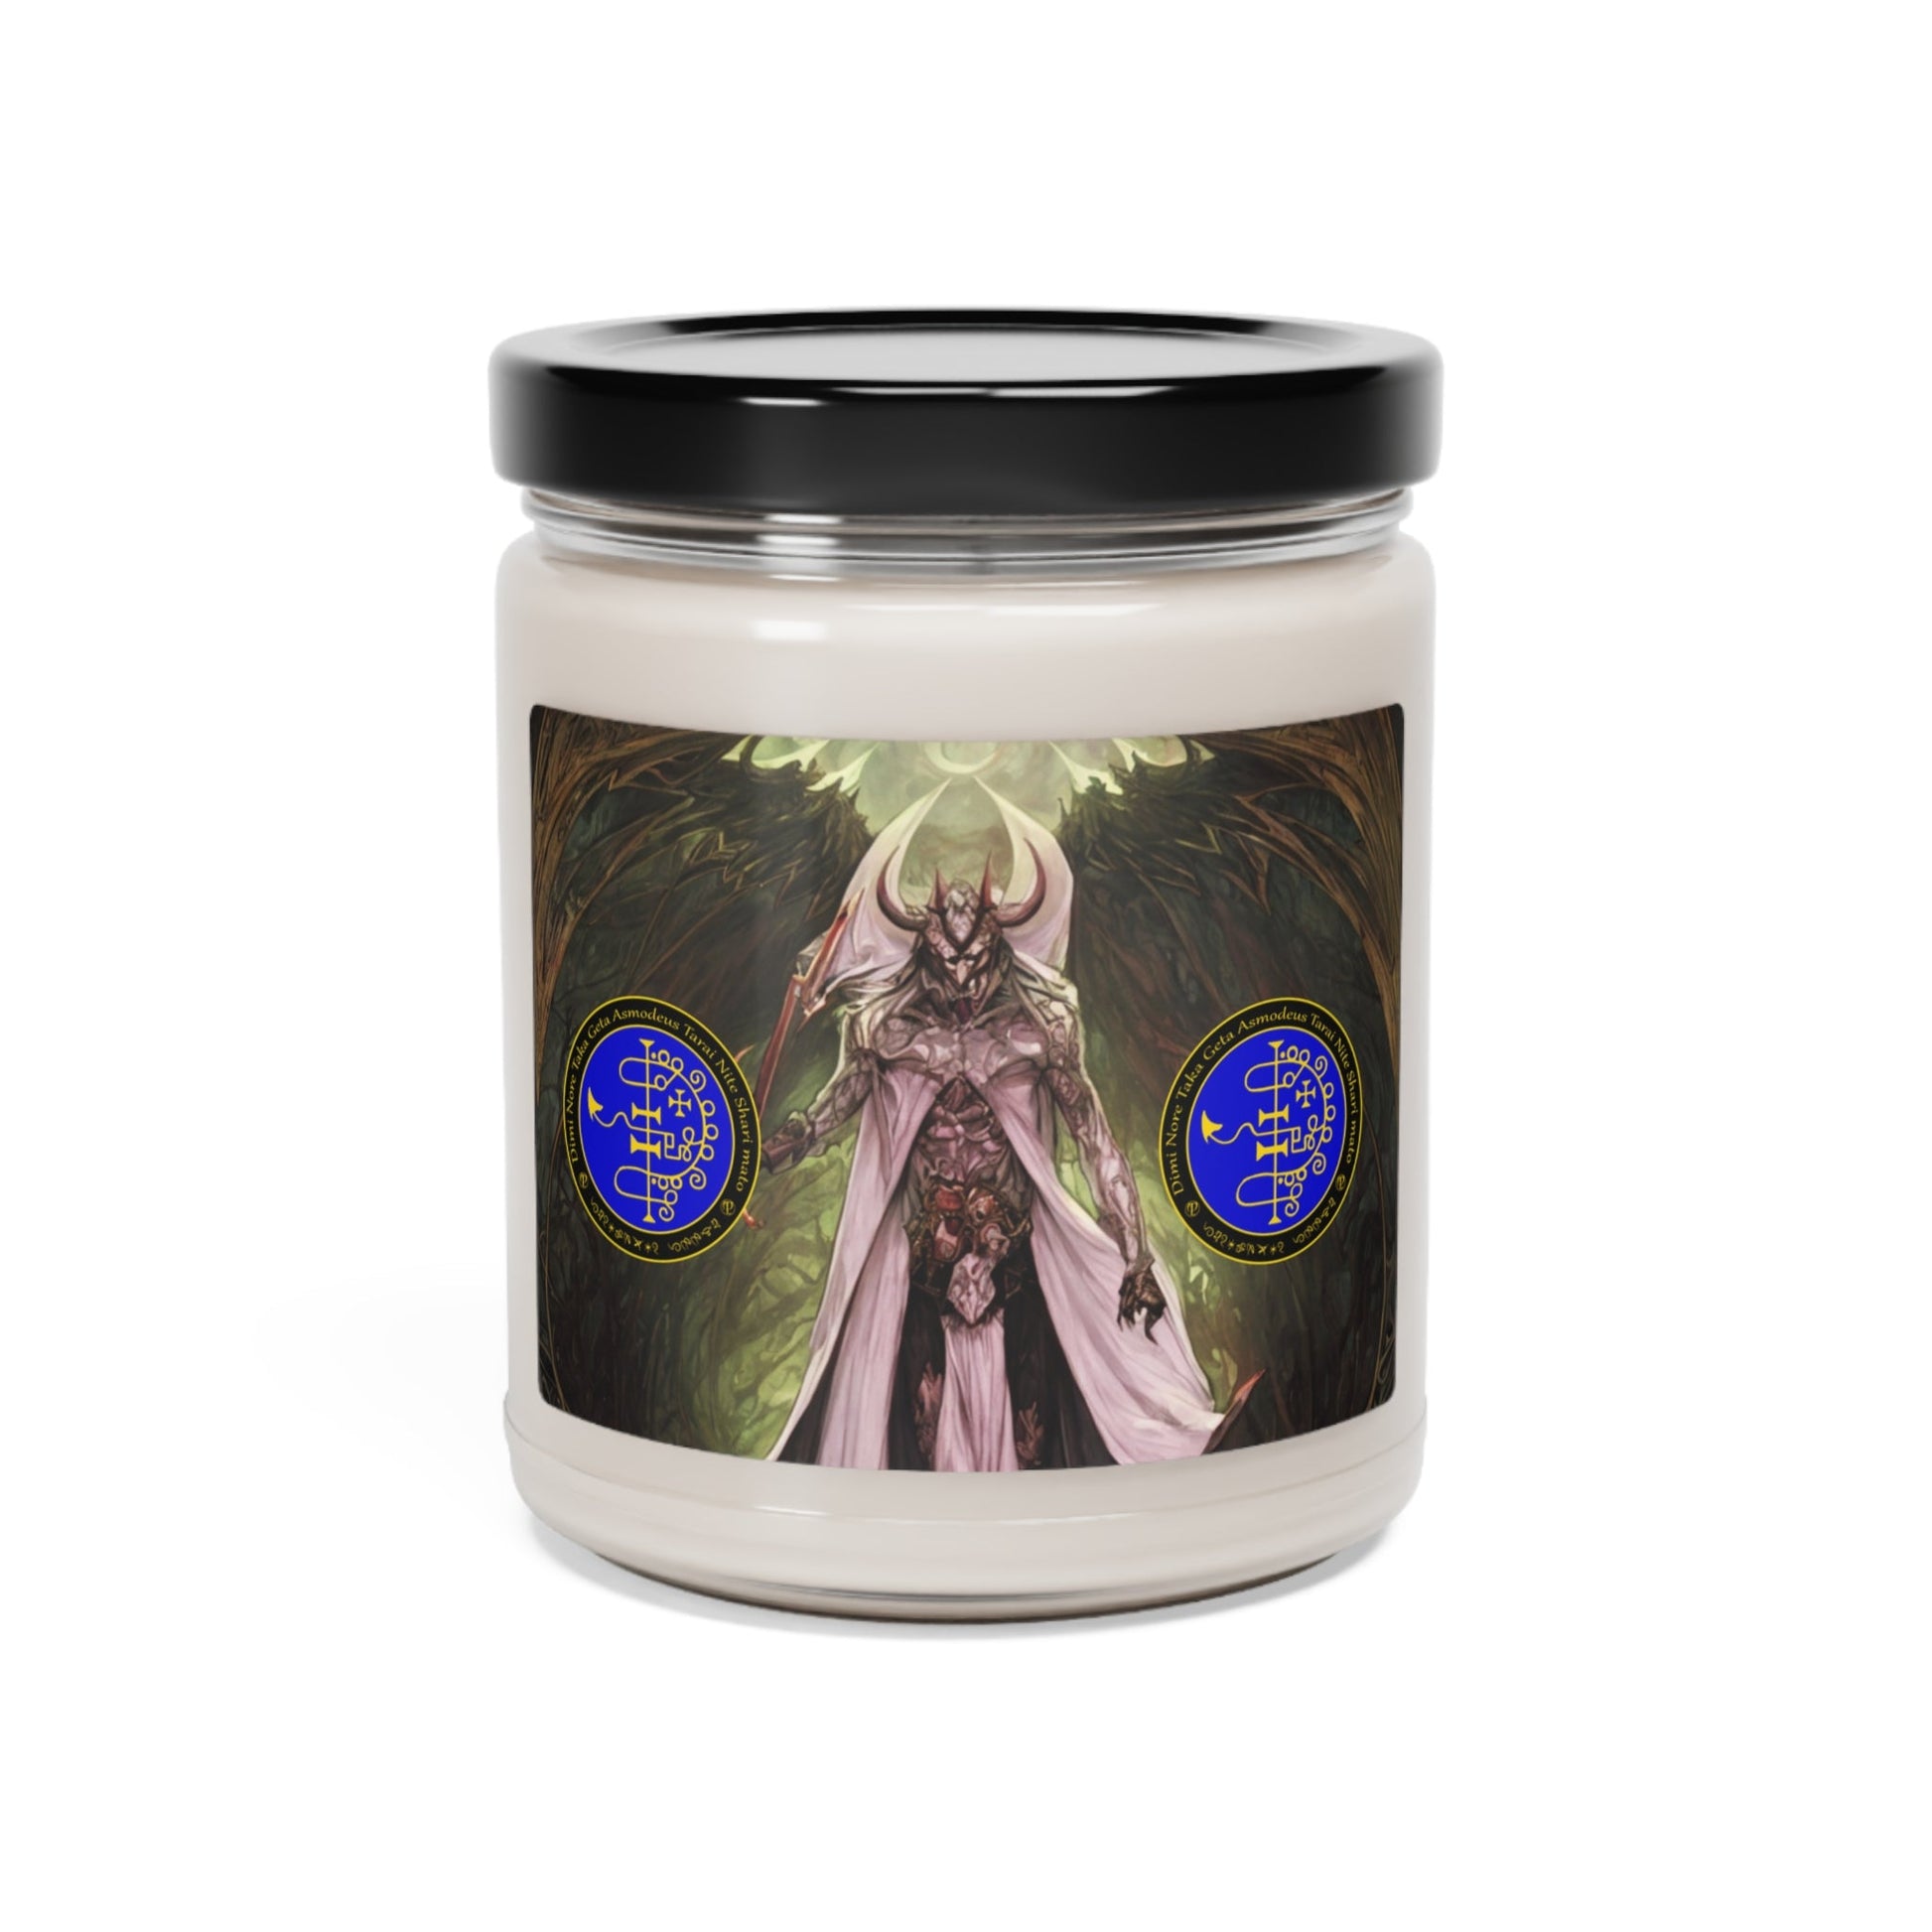 Demon-Asmodeus-Altar-Scented-Soy-Candle-for-Gambling-related-offerings-rituals-initiations-or-praying-and-meditation-21